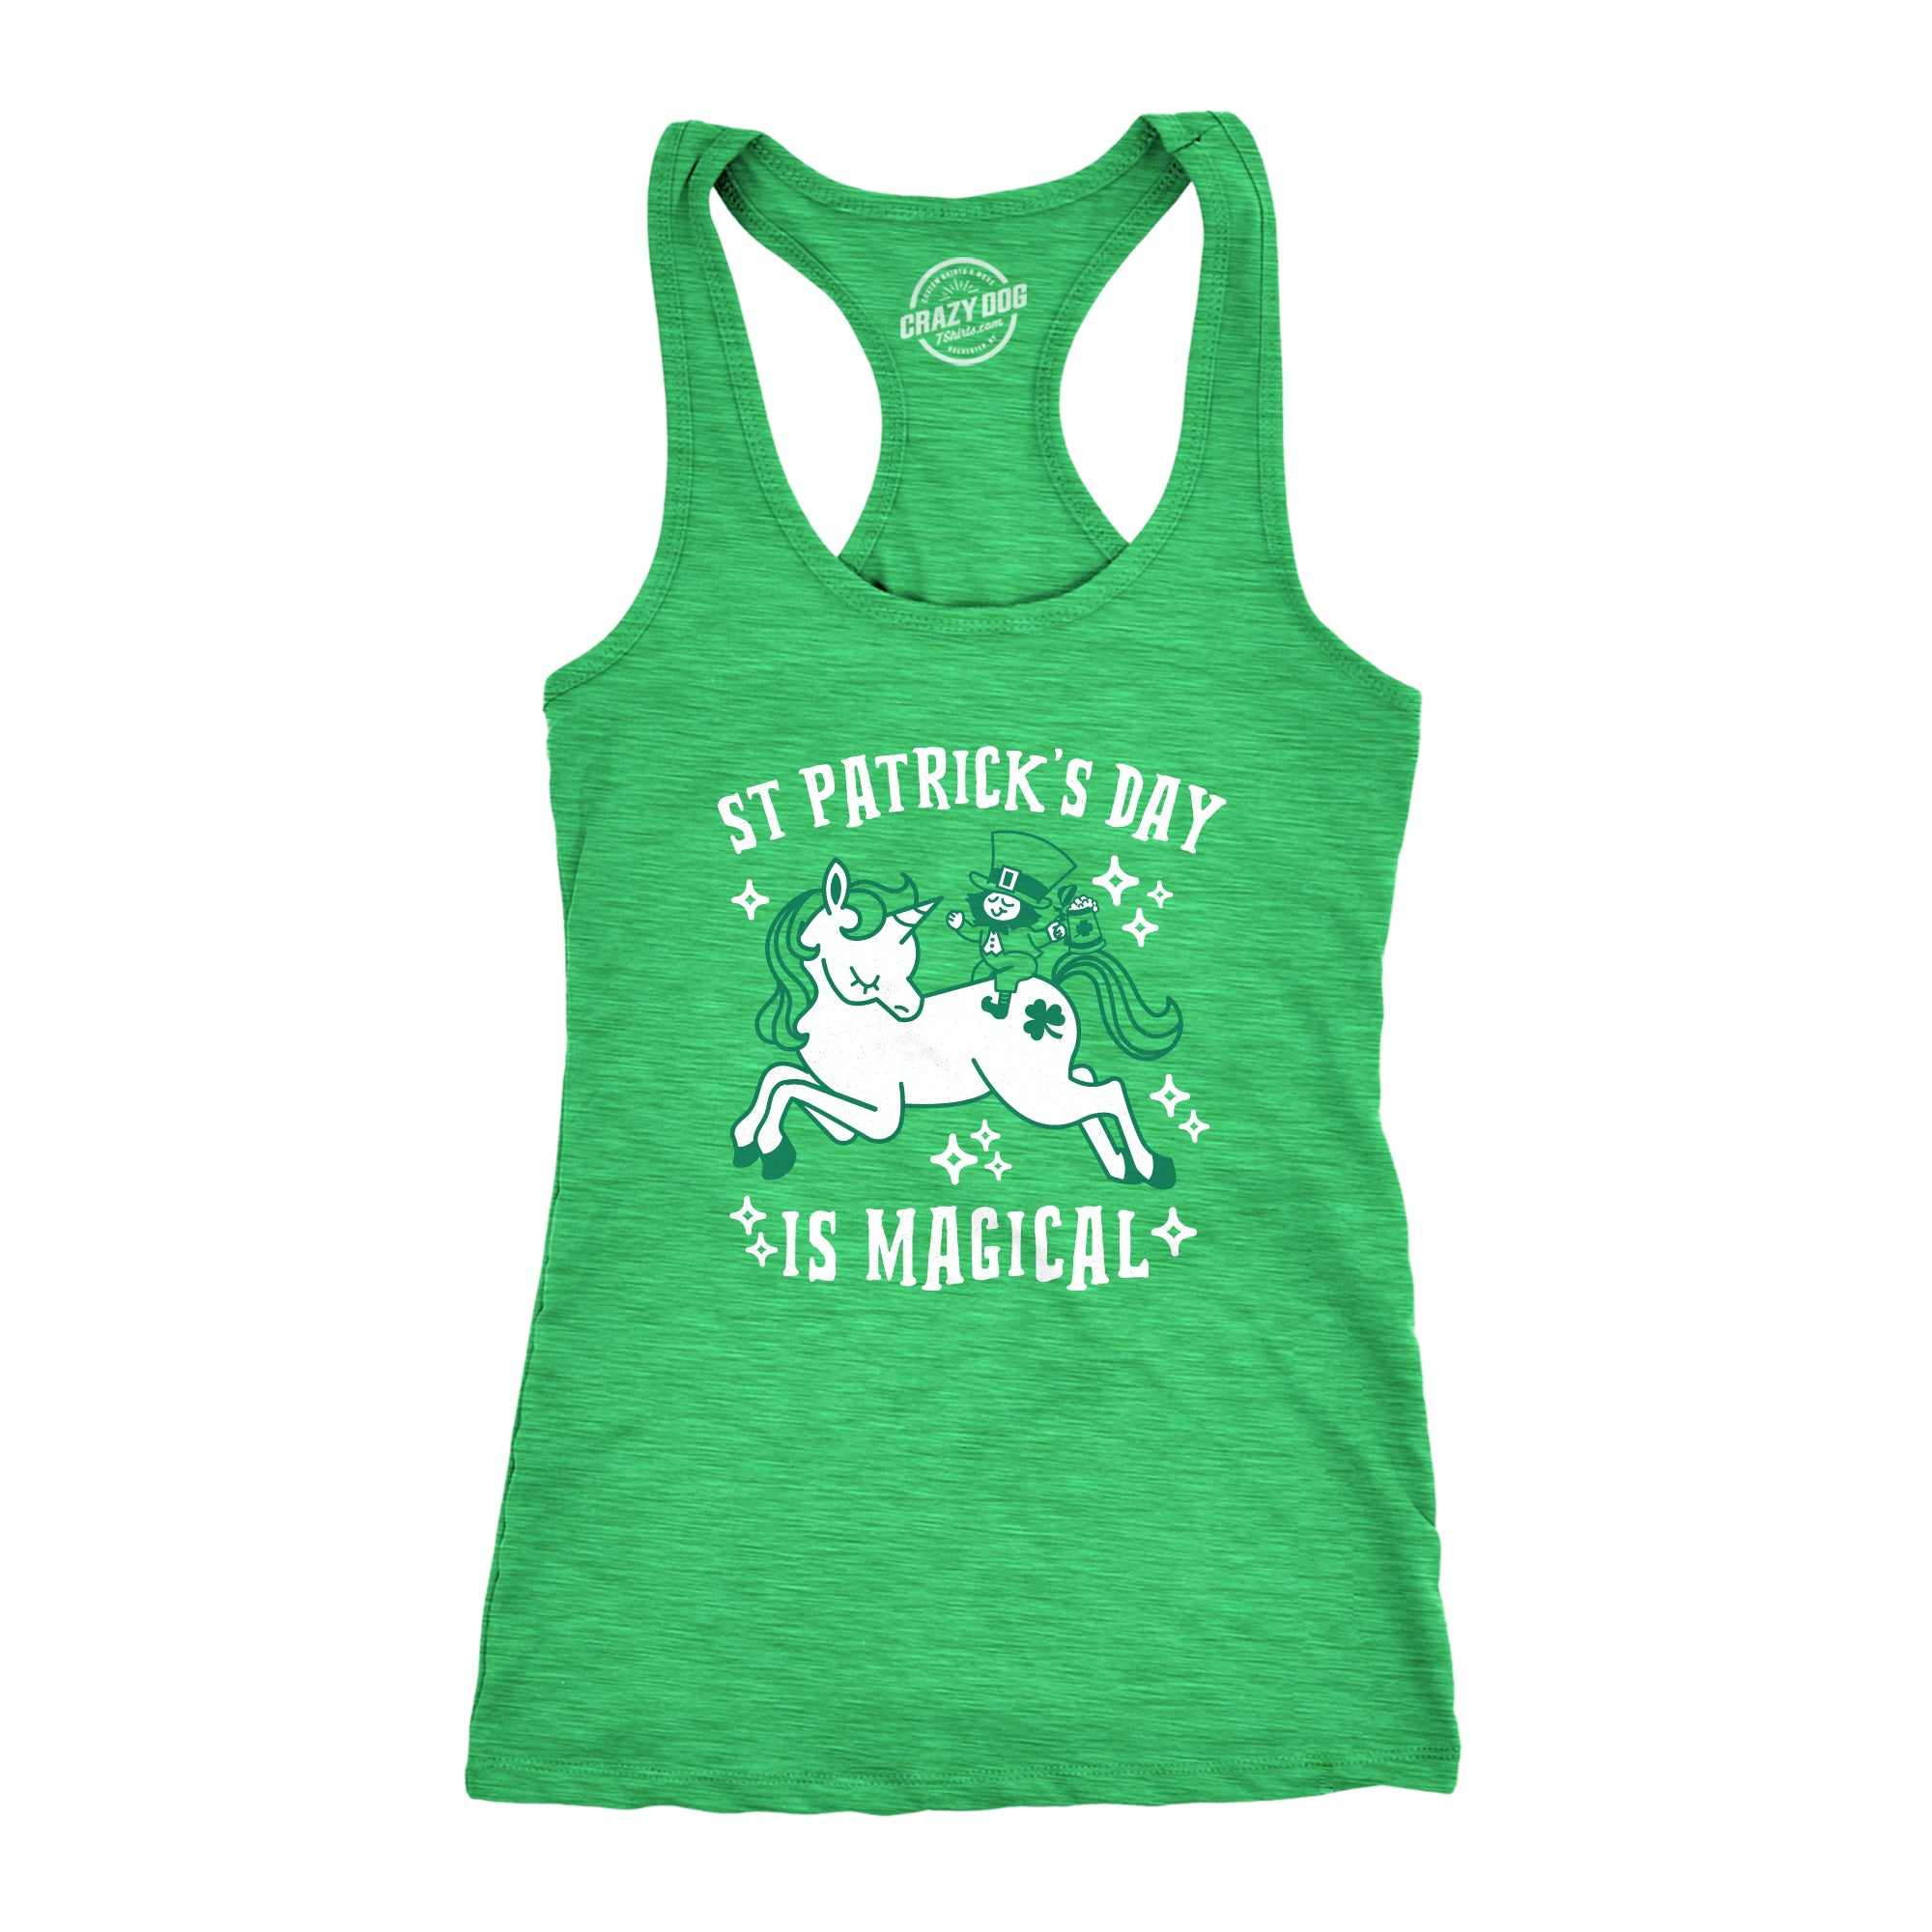 Funny Heather Green St. Patrick's Day Is Magical Womens Tank Top Nerdy Saint Patrick's Day Unicorn Tee